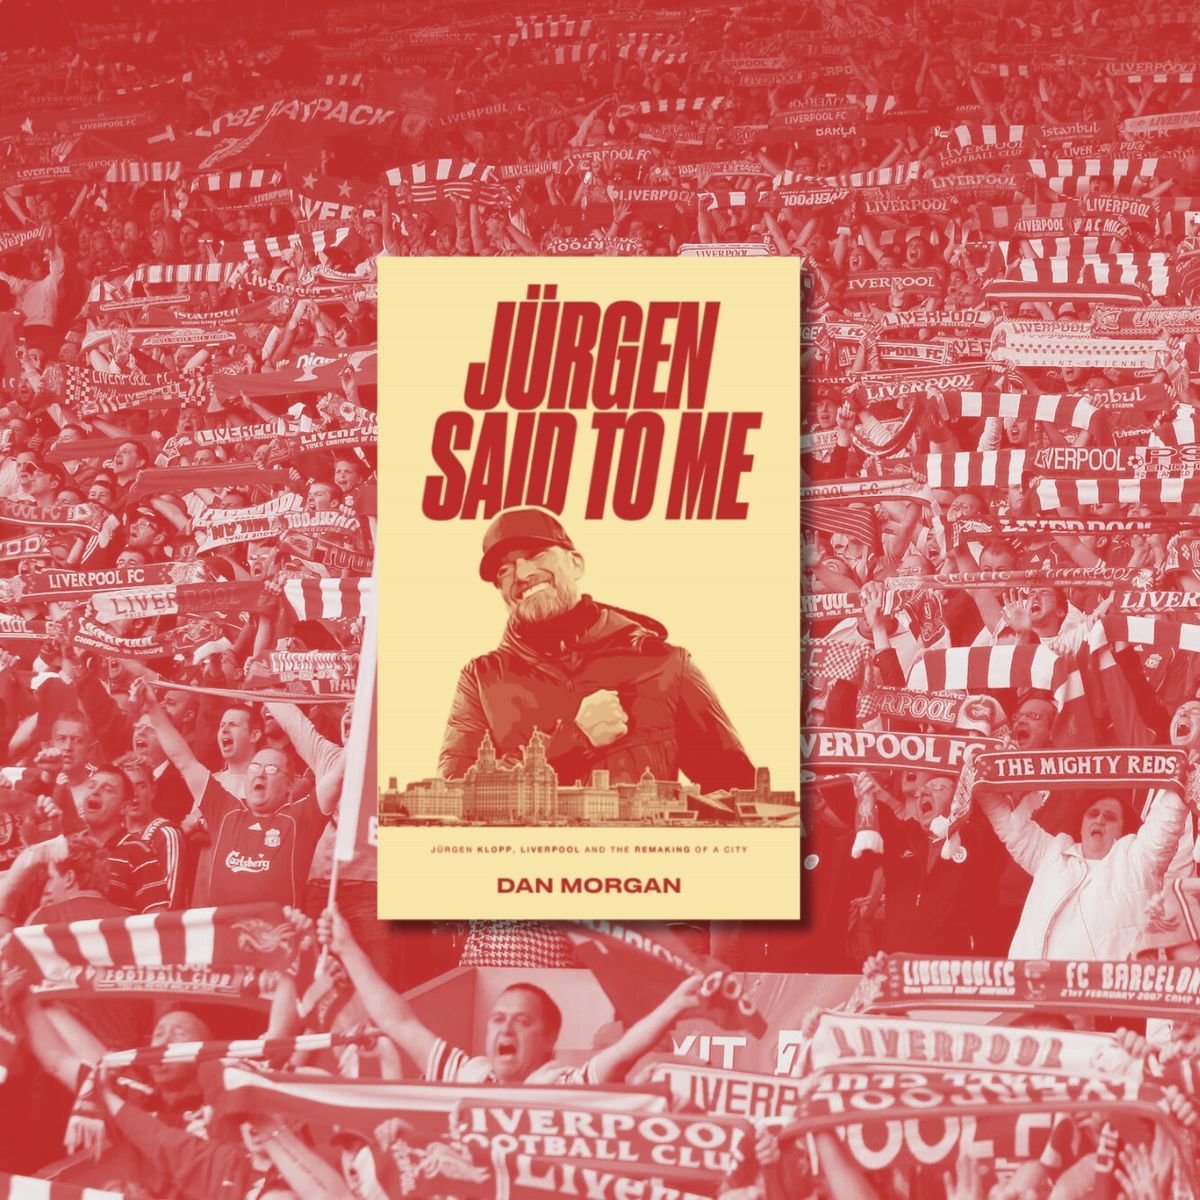 𝐏𝐑𝐄𝐎𝐑𝐃𝐄𝐑 | JÜRGEN SAID TO ME by @dan_morgan3 Delighted to open preorders for this new book centred around #LFC's most successful and charismatic leader of recent times All preorders get £2 off RRP + signed by the author @TheAnfieldWrap 🛒 stanchionbooks.com/products/jurge…